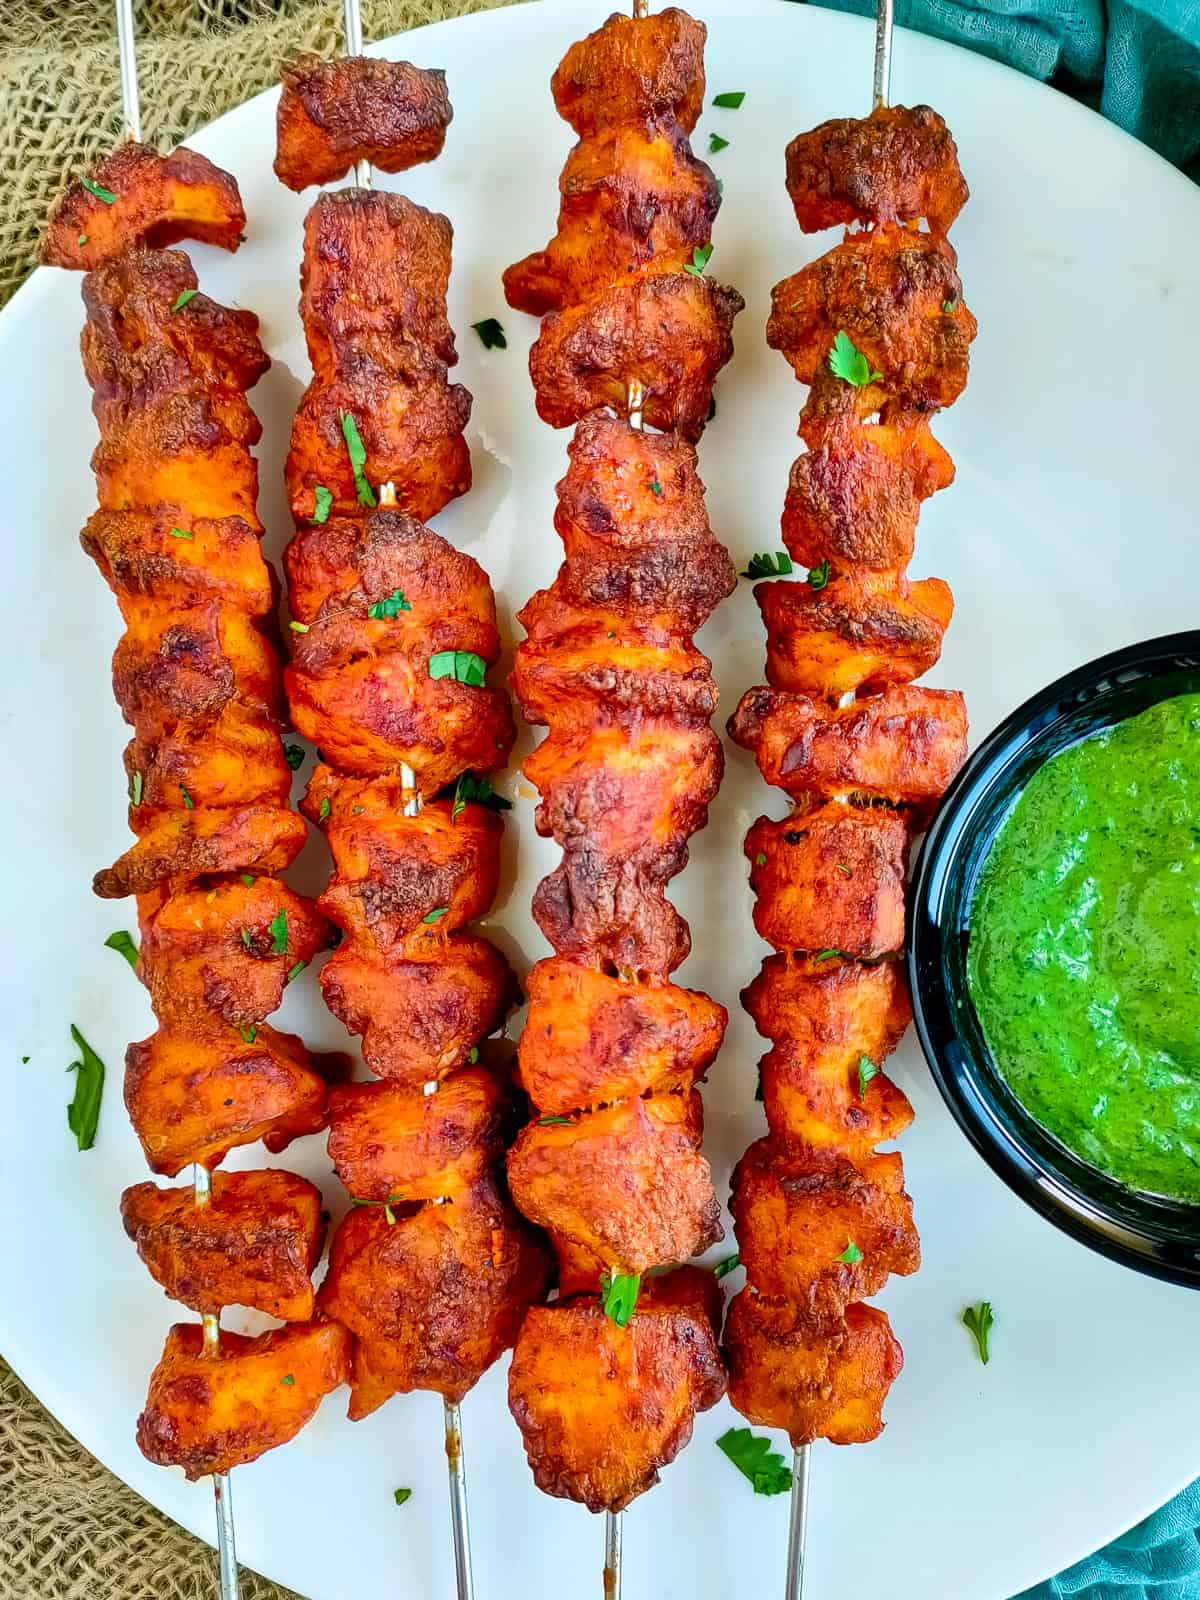 Tandoori chicken tikka on skewers served with mint chutney on a white plate.